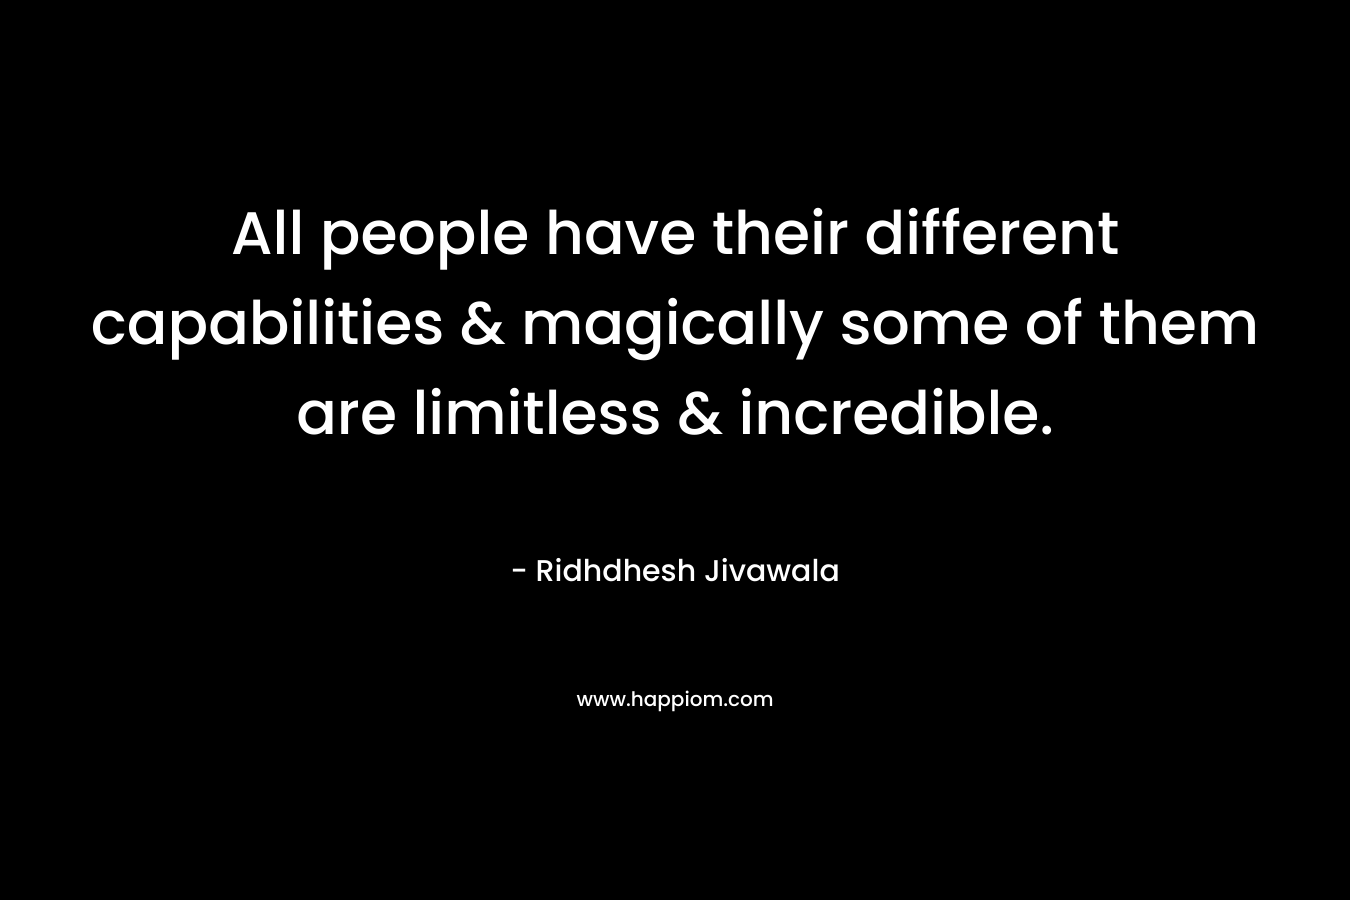 All people have their different capabilities & magically some of them are limitless & incredible. – Ridhdhesh Jivawala